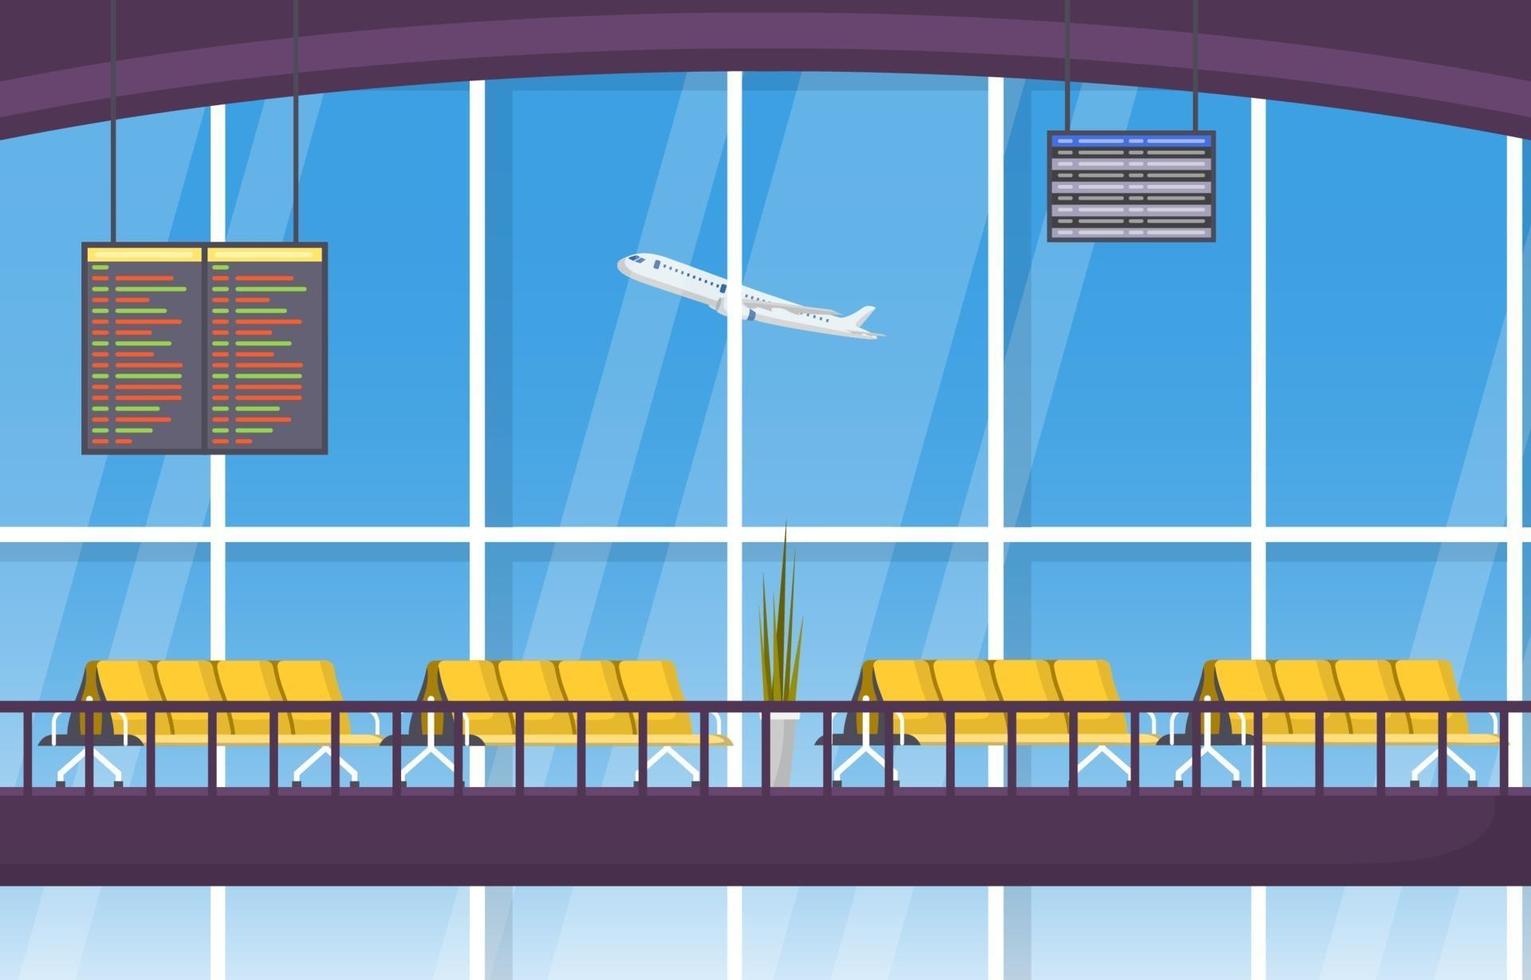 Airport Airplane Terminal Gate Waiting Room Hall Interior Flat Illustration vector